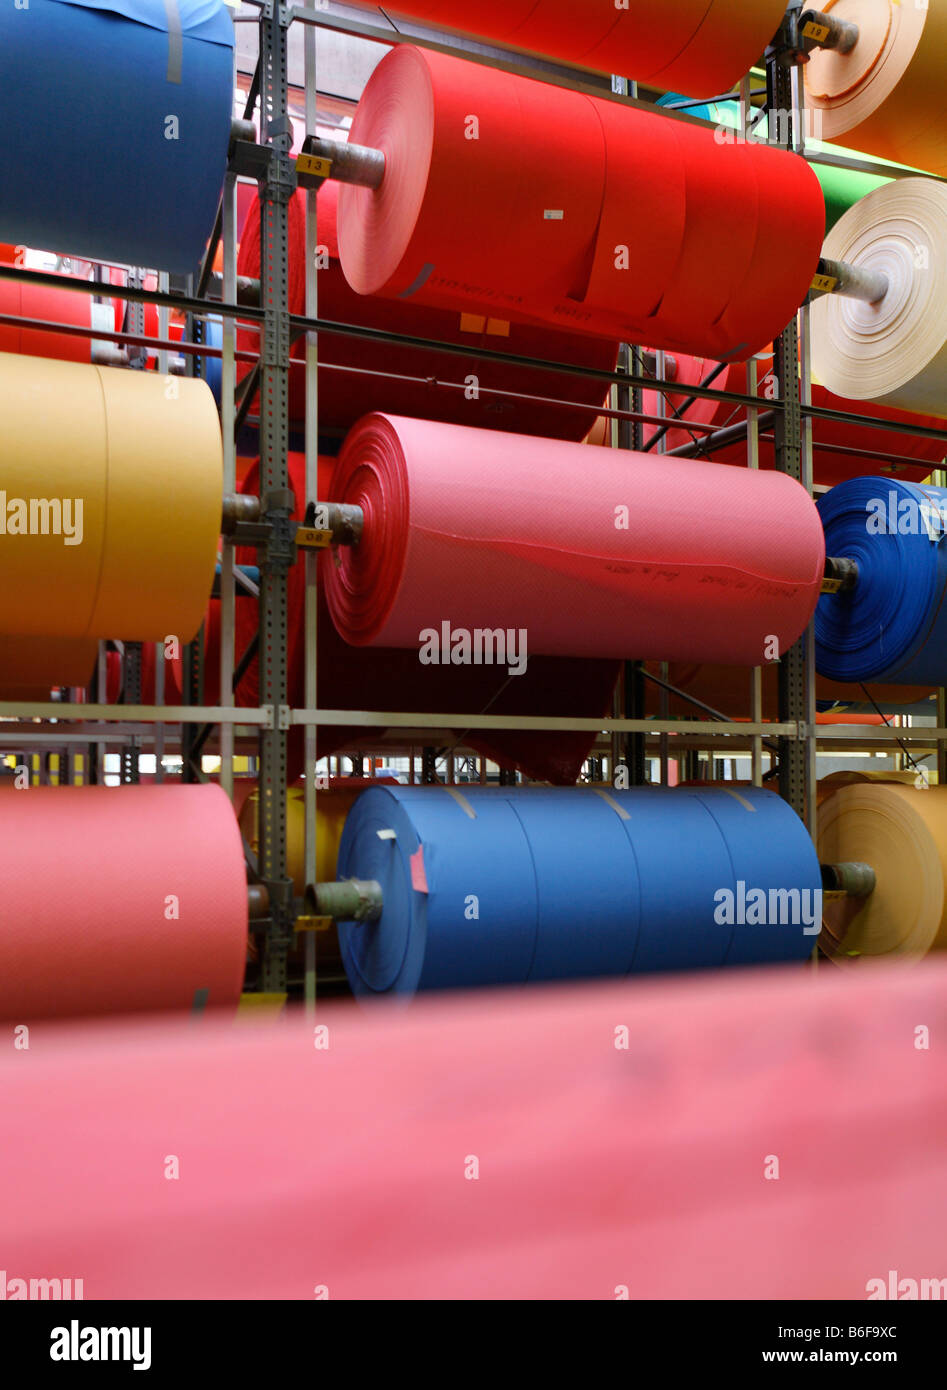 Store filled with rolls of nonwoven fabric in all colors for the production of commercial cleaning cloths used by cleaning serv Stock Photo